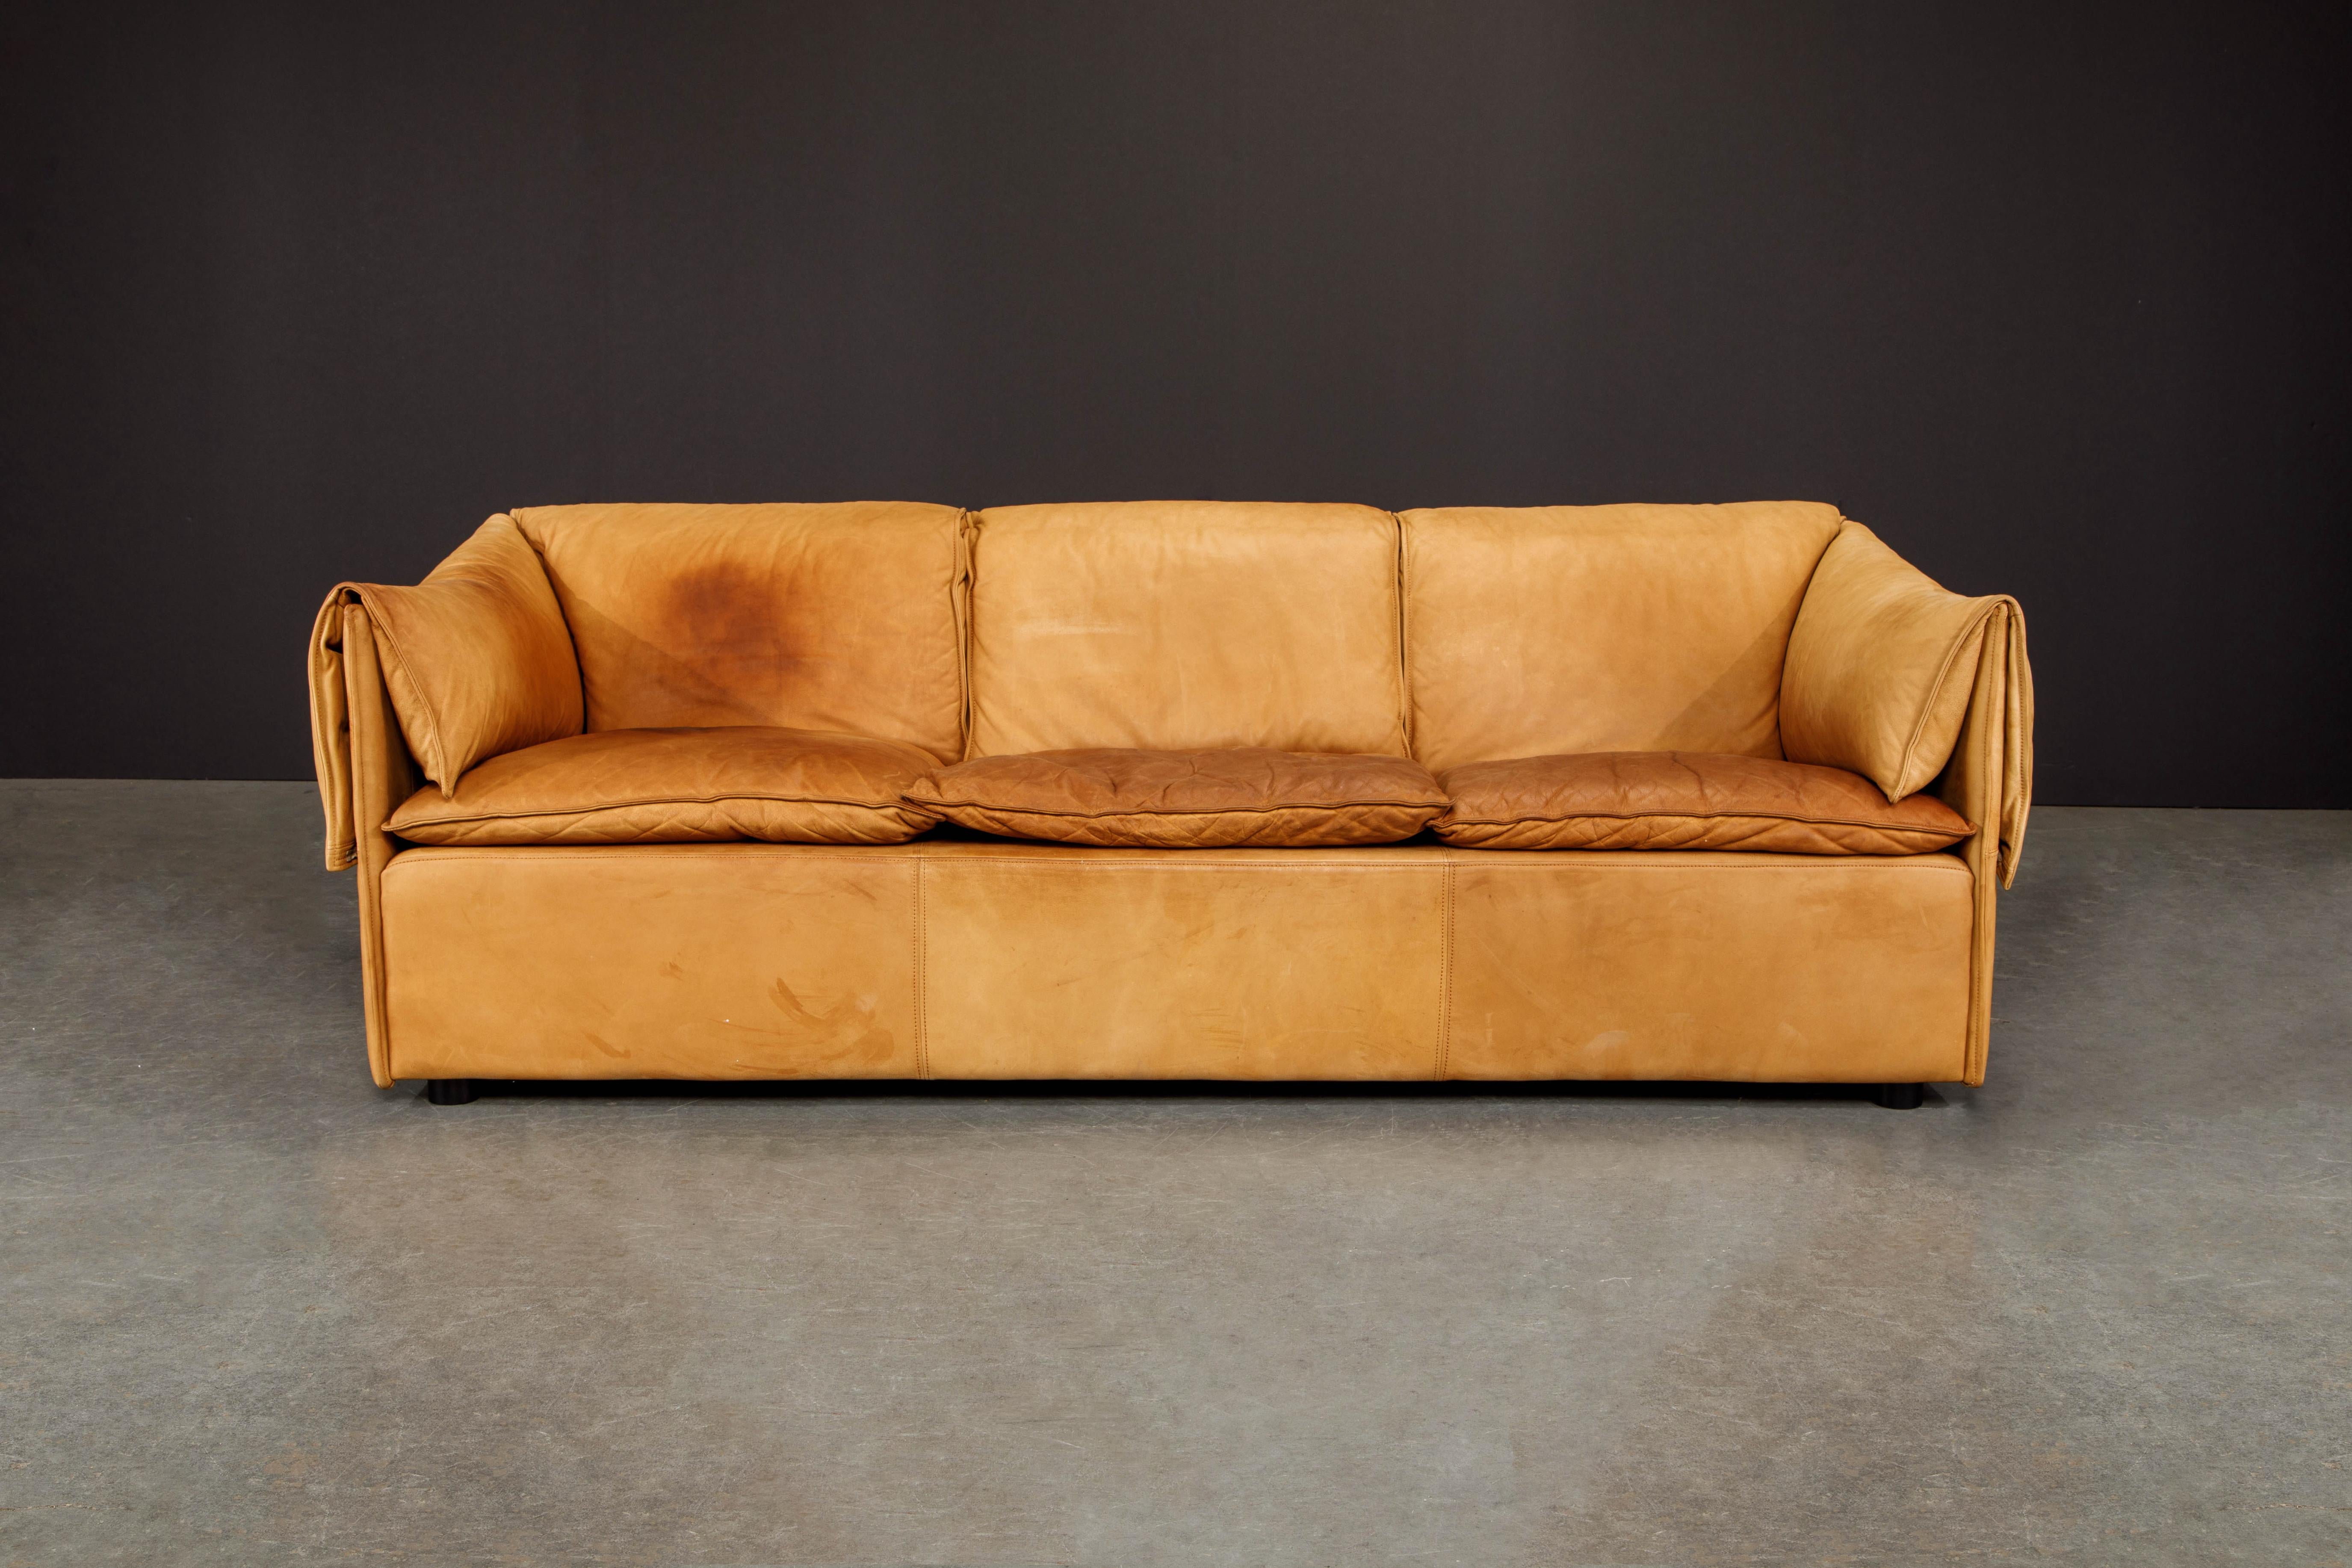 This beautifully patinated leather 'Lotus' sofa by Niels Bendtsen for Niels Eilersen is covered in comfy Danish glove-soft leather. Featuring three loose seat cushions with draped and zipper attached cushions that fold over the the back and sides.